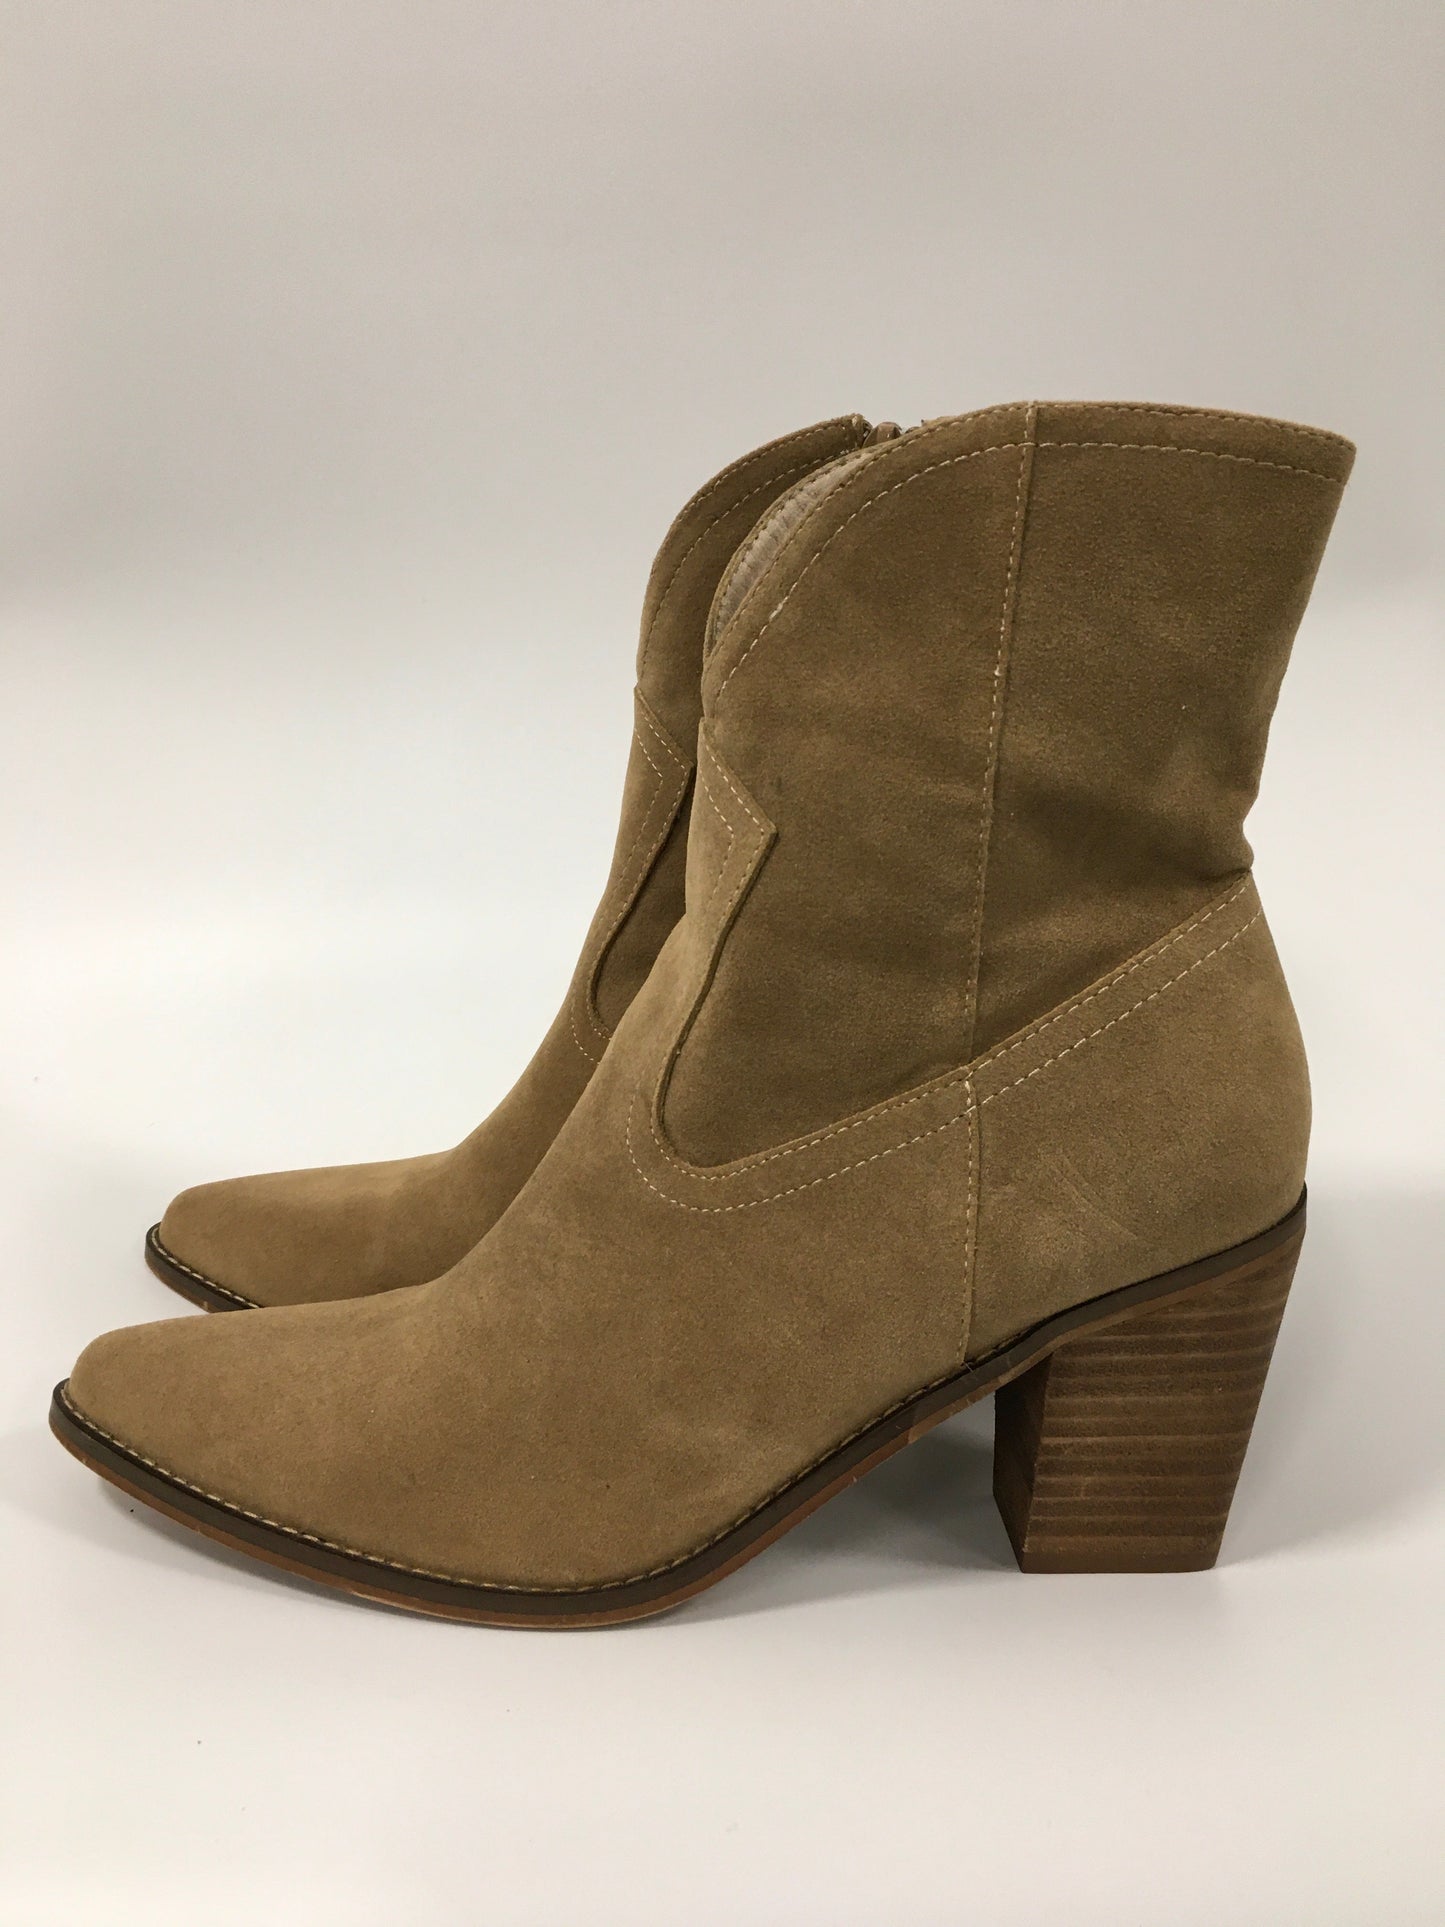 Boots Ankle Heels By OASIS SOCIETY Size: 10